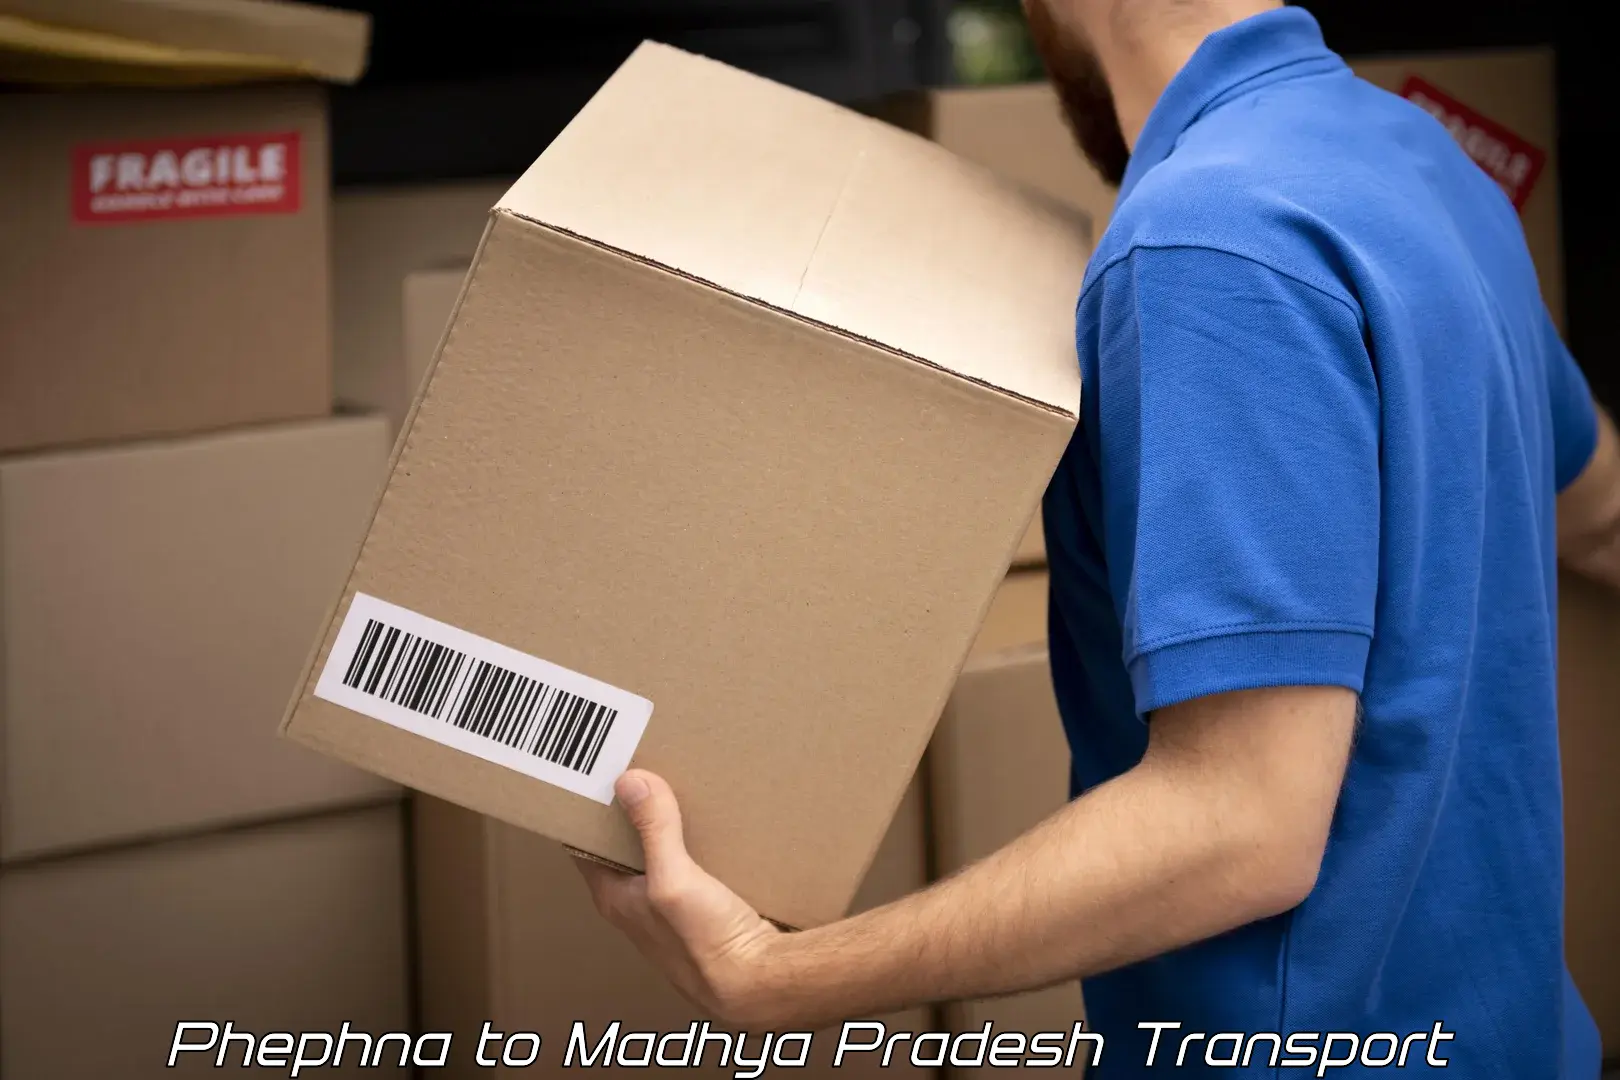 Daily parcel service transport Phephna to Indore